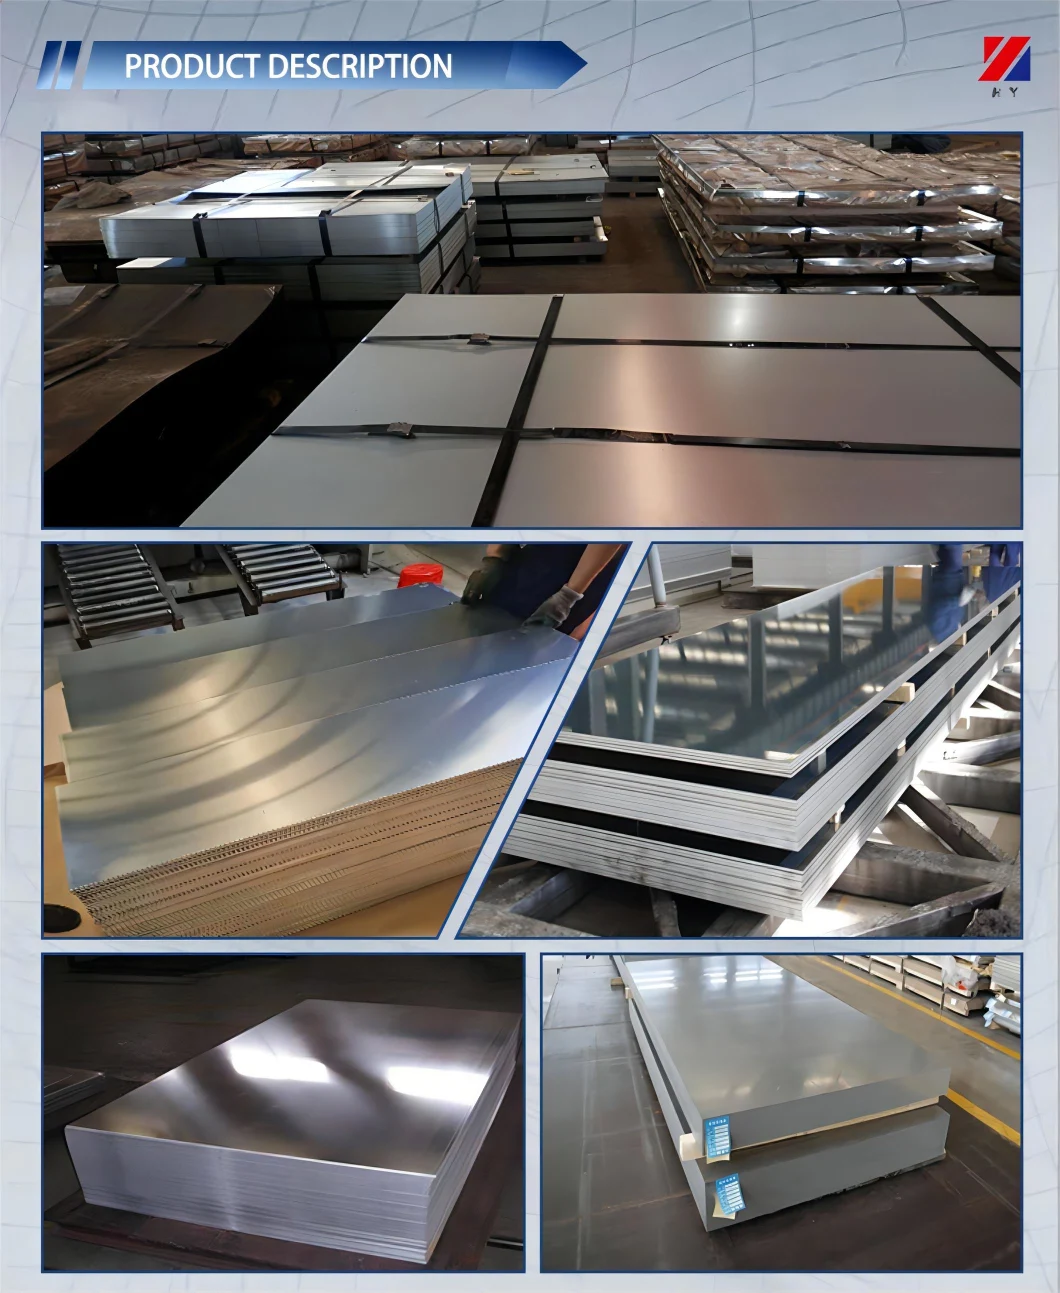 ASTM AISI DIN JIS ISO Stainless Steel/Aluminum/Copper/Brass/Bronze/Carbon Steel/Monel/Inconel/Alloy Steel/Metal/Galvanized Corrugated/Plates Sheet Plate Sheet